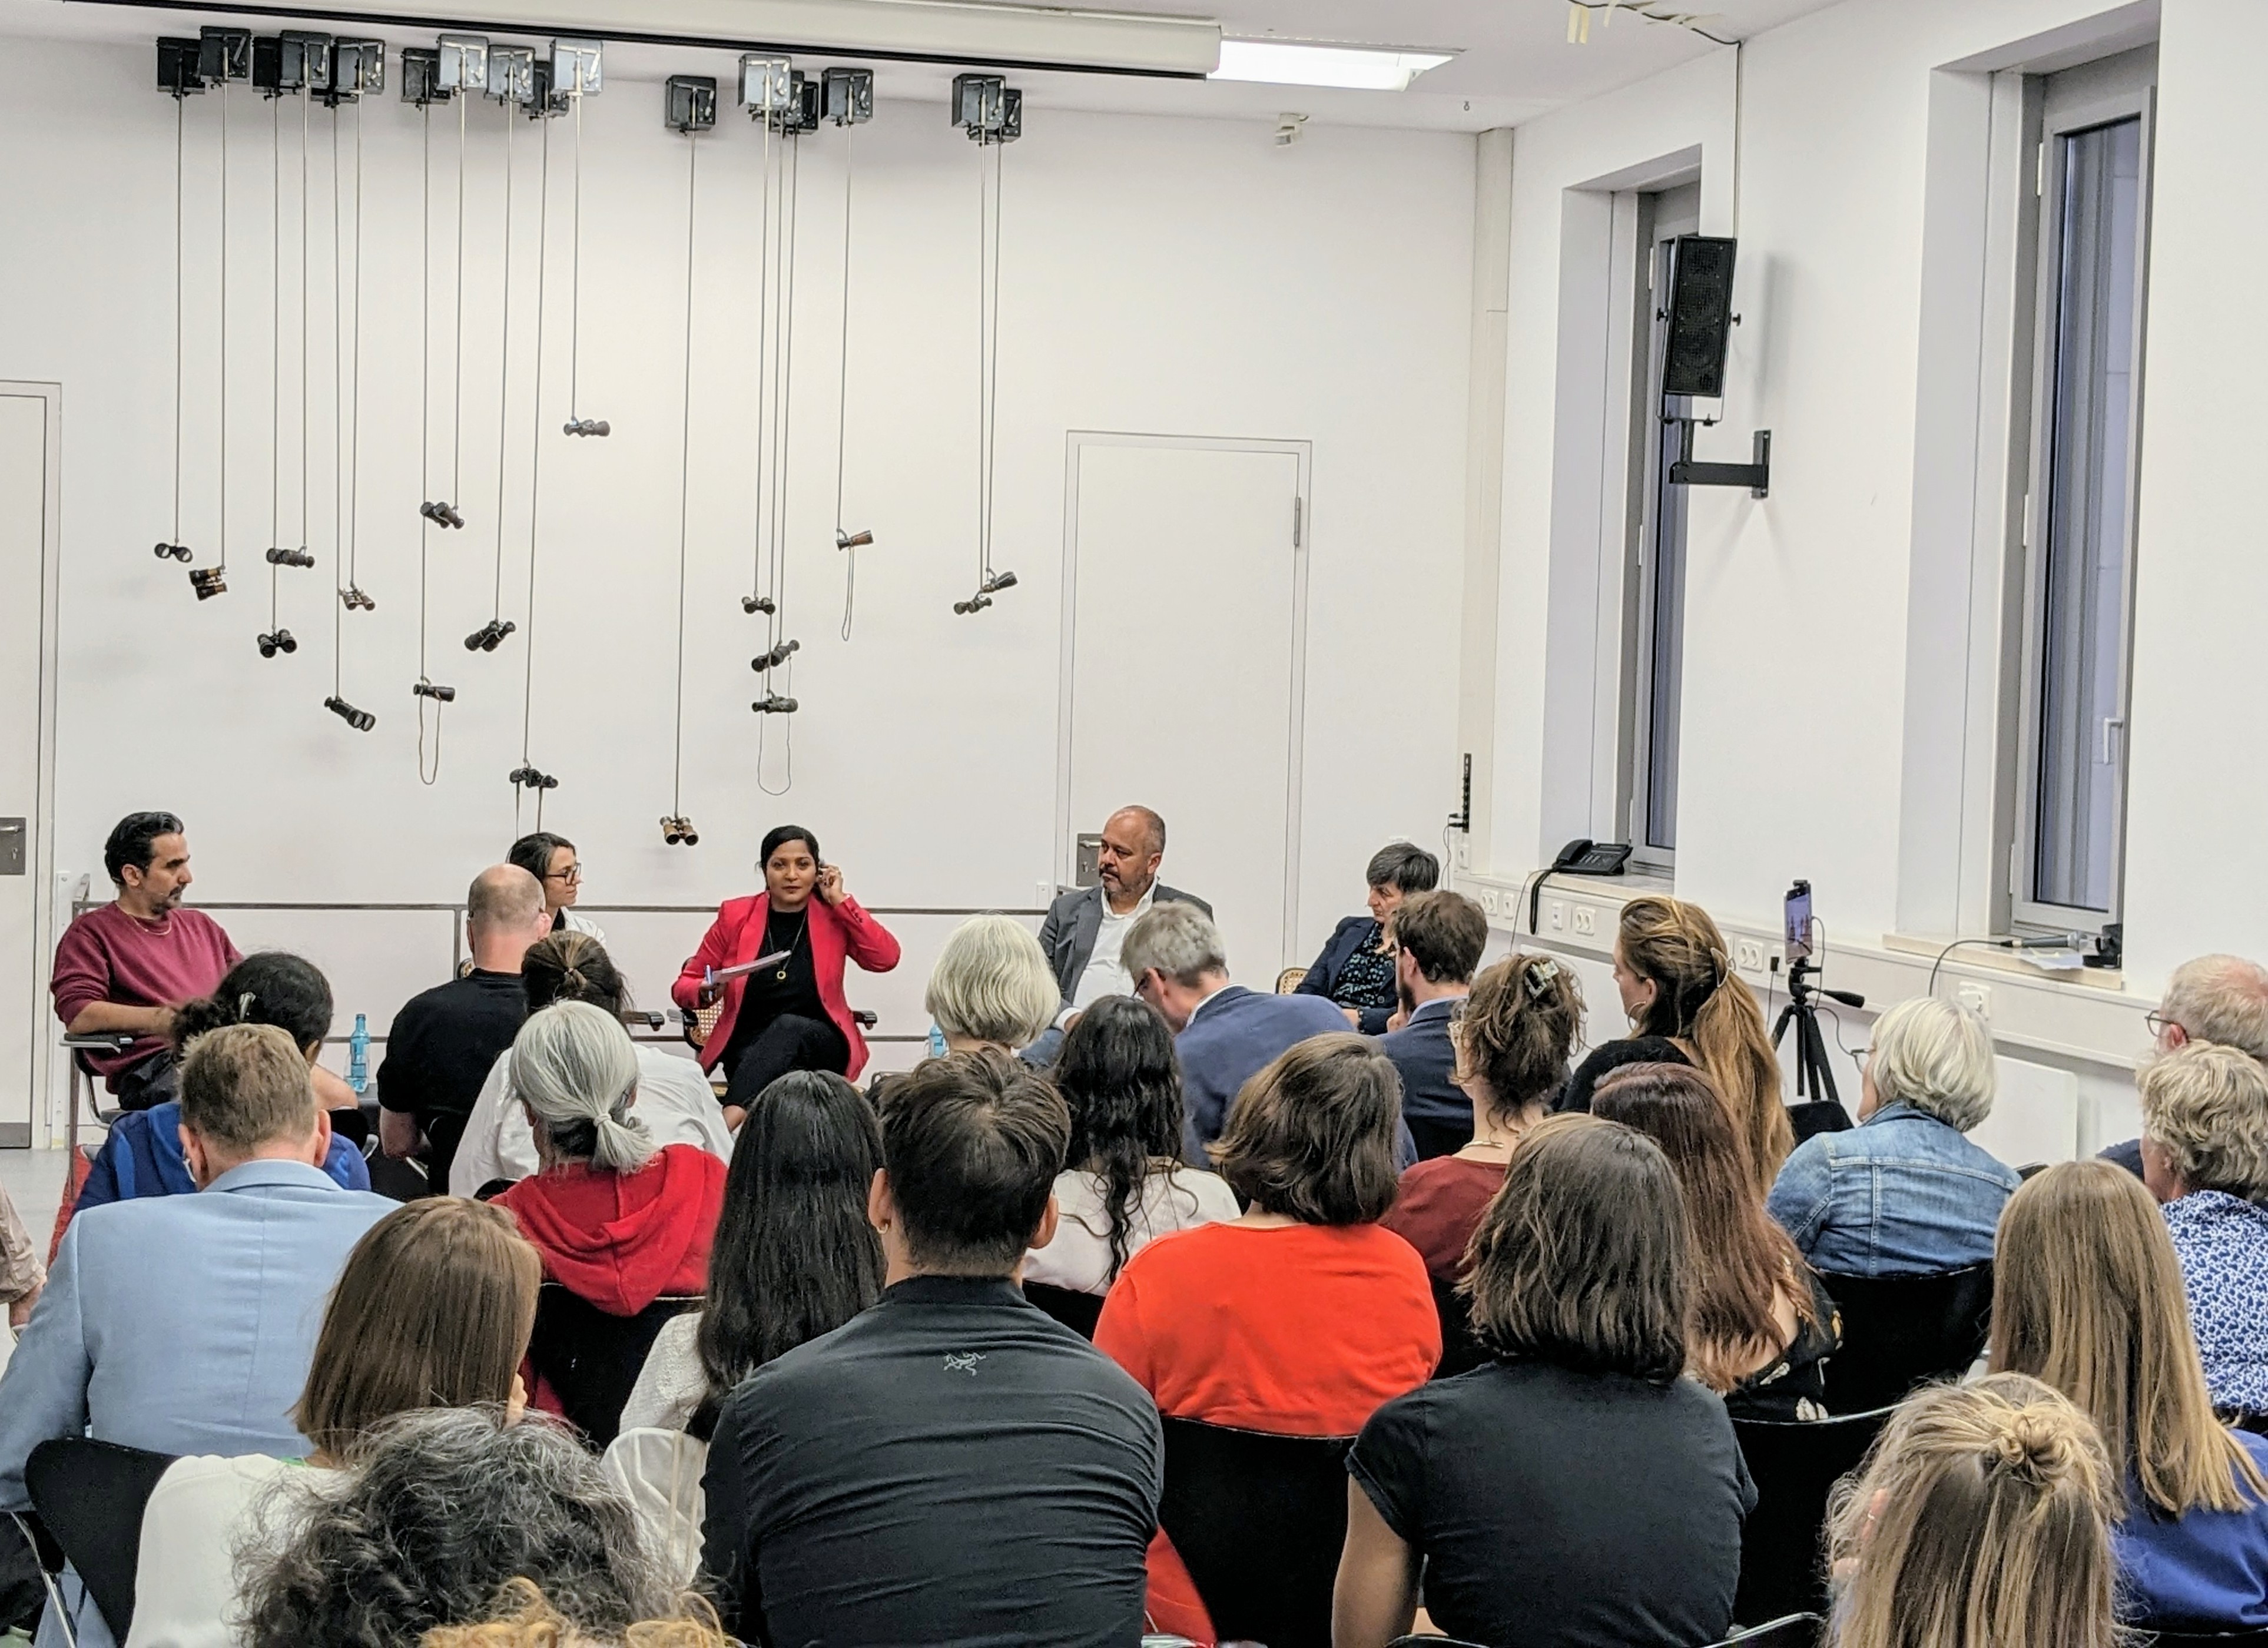 Around 40 members of the audience listened spellbound to the discussion under the title Panel: "Who we are" - Migration in the area of tension between German museums